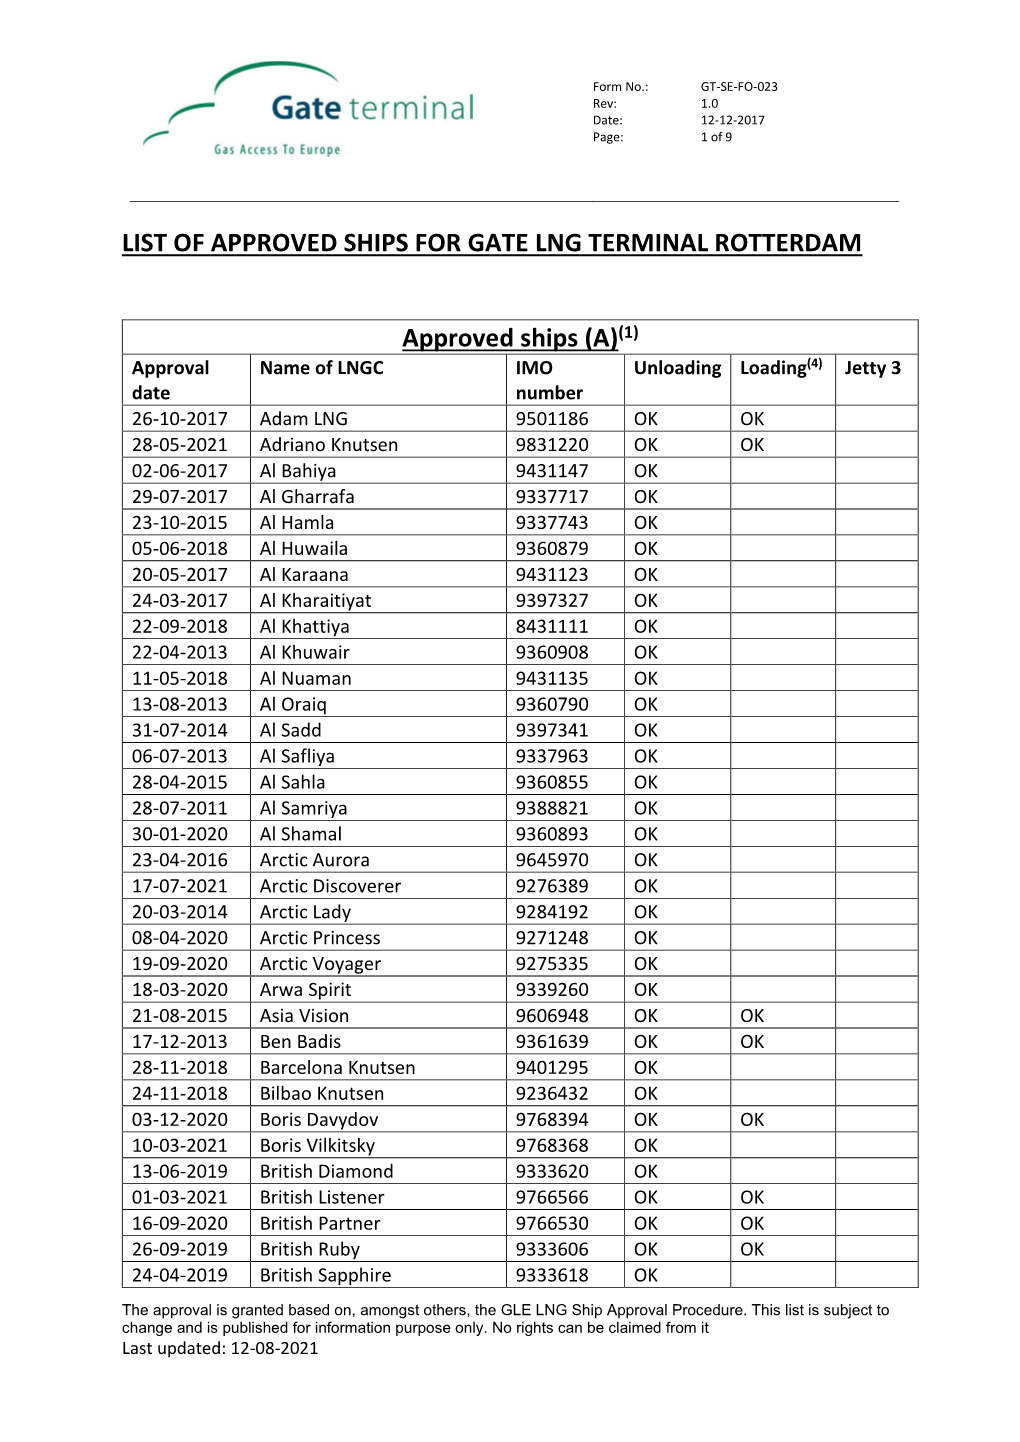 List of Approved Ships for Gate Lng Terminal Rotterdam